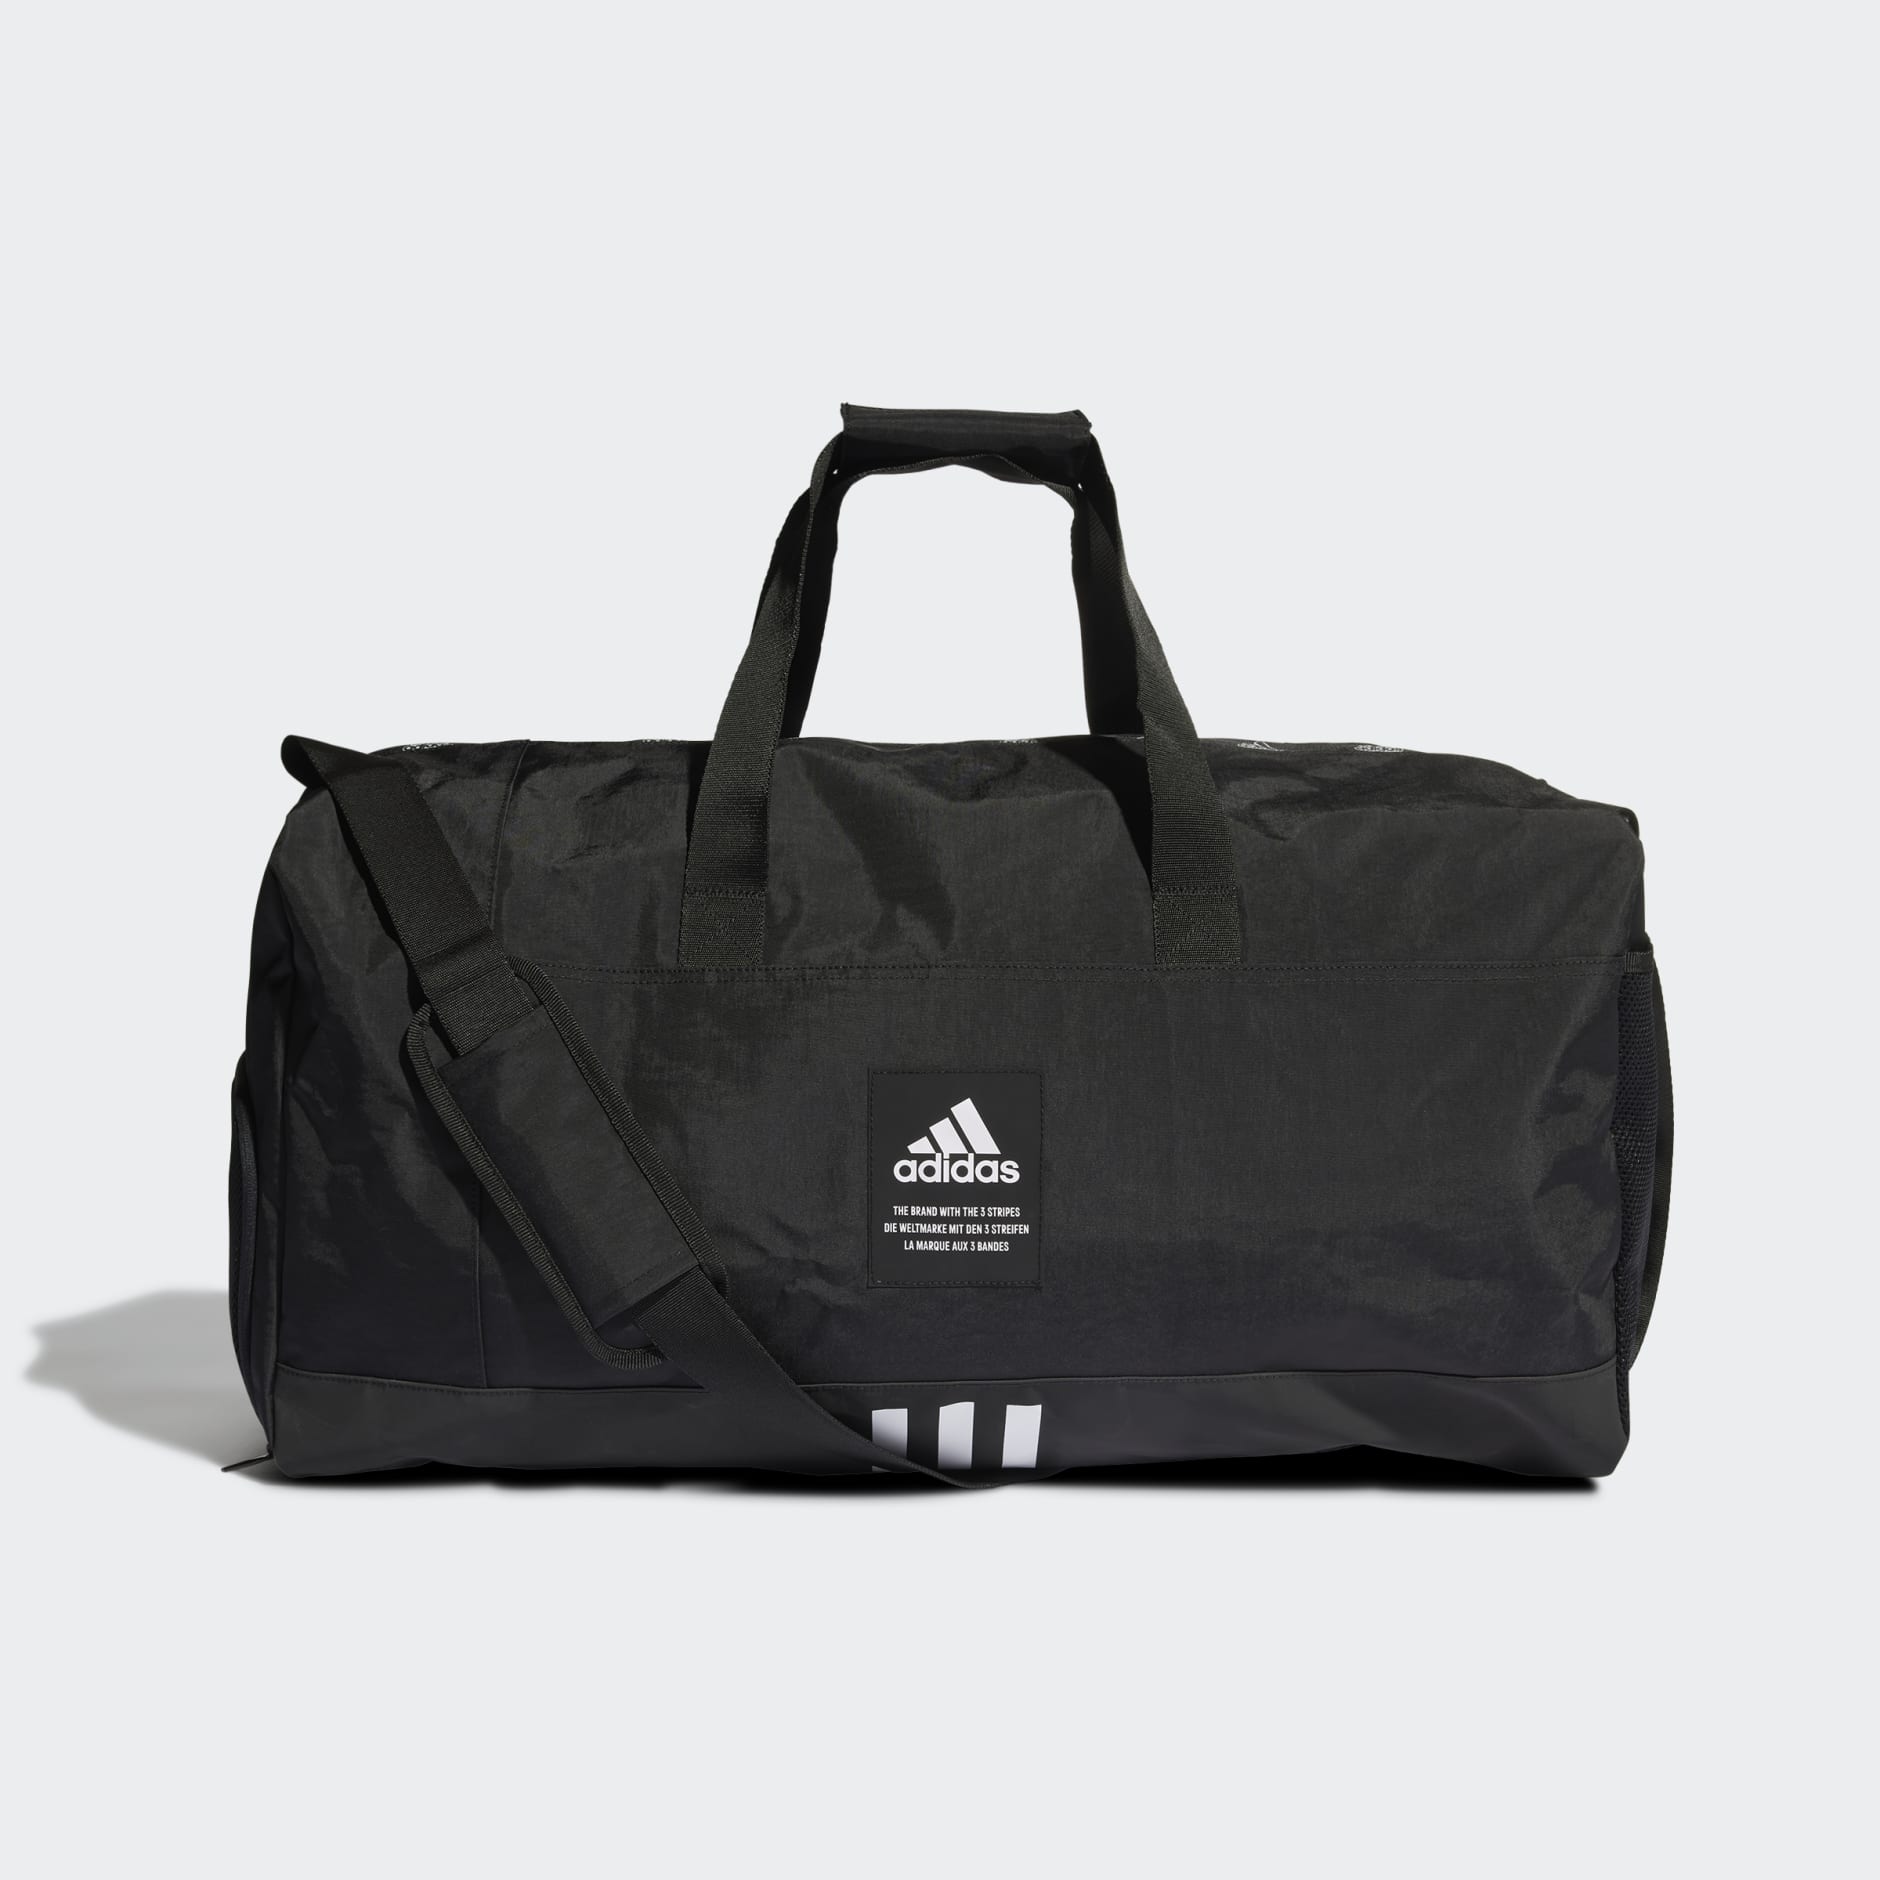 Accessories - 4ATHLTS Duffel Bag Large - Black | adidas South Africa